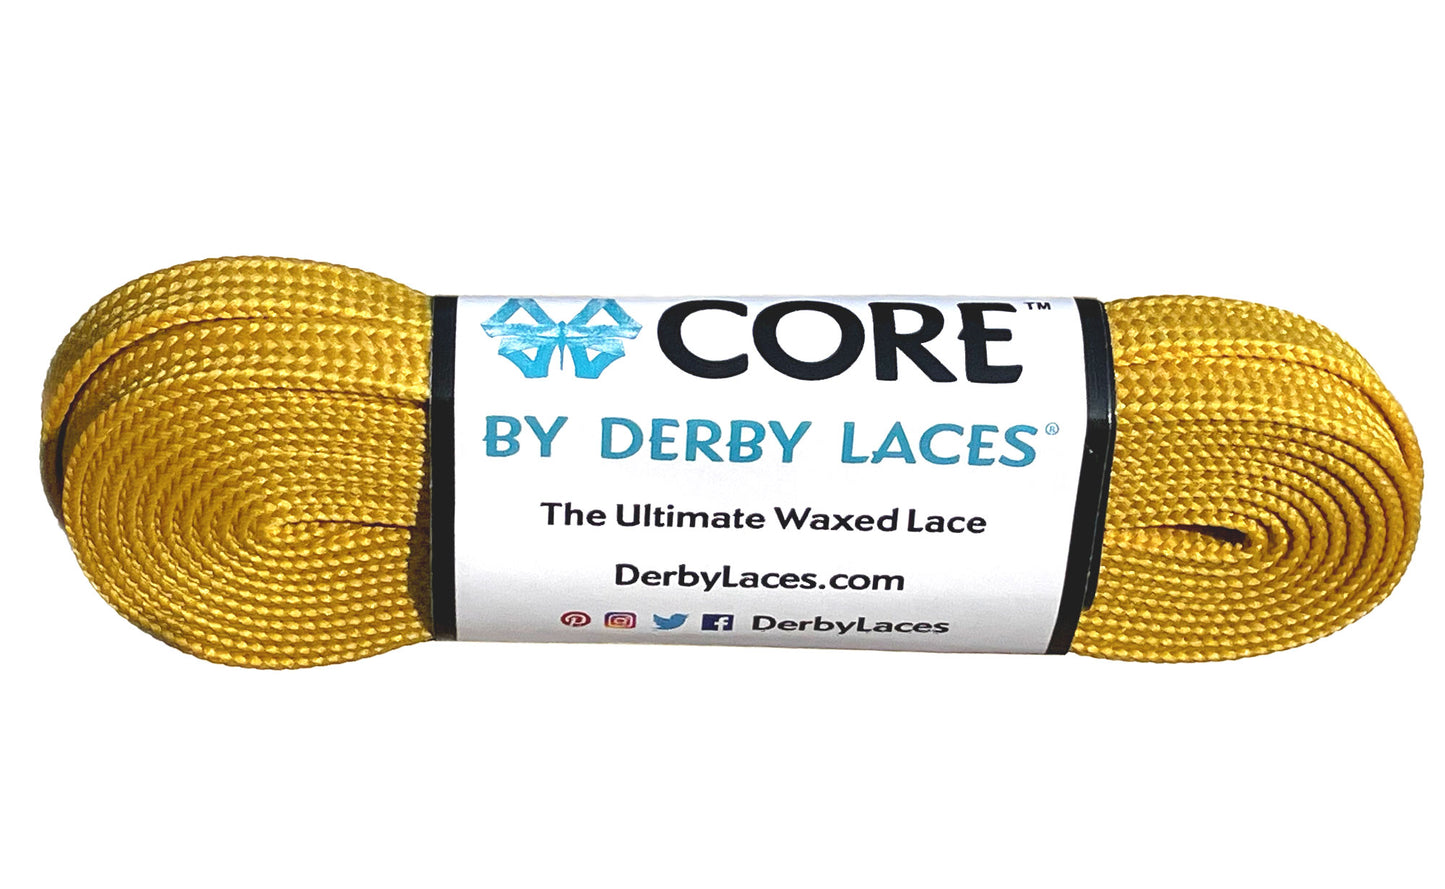 Derby Laces CORE 6mm Waxed